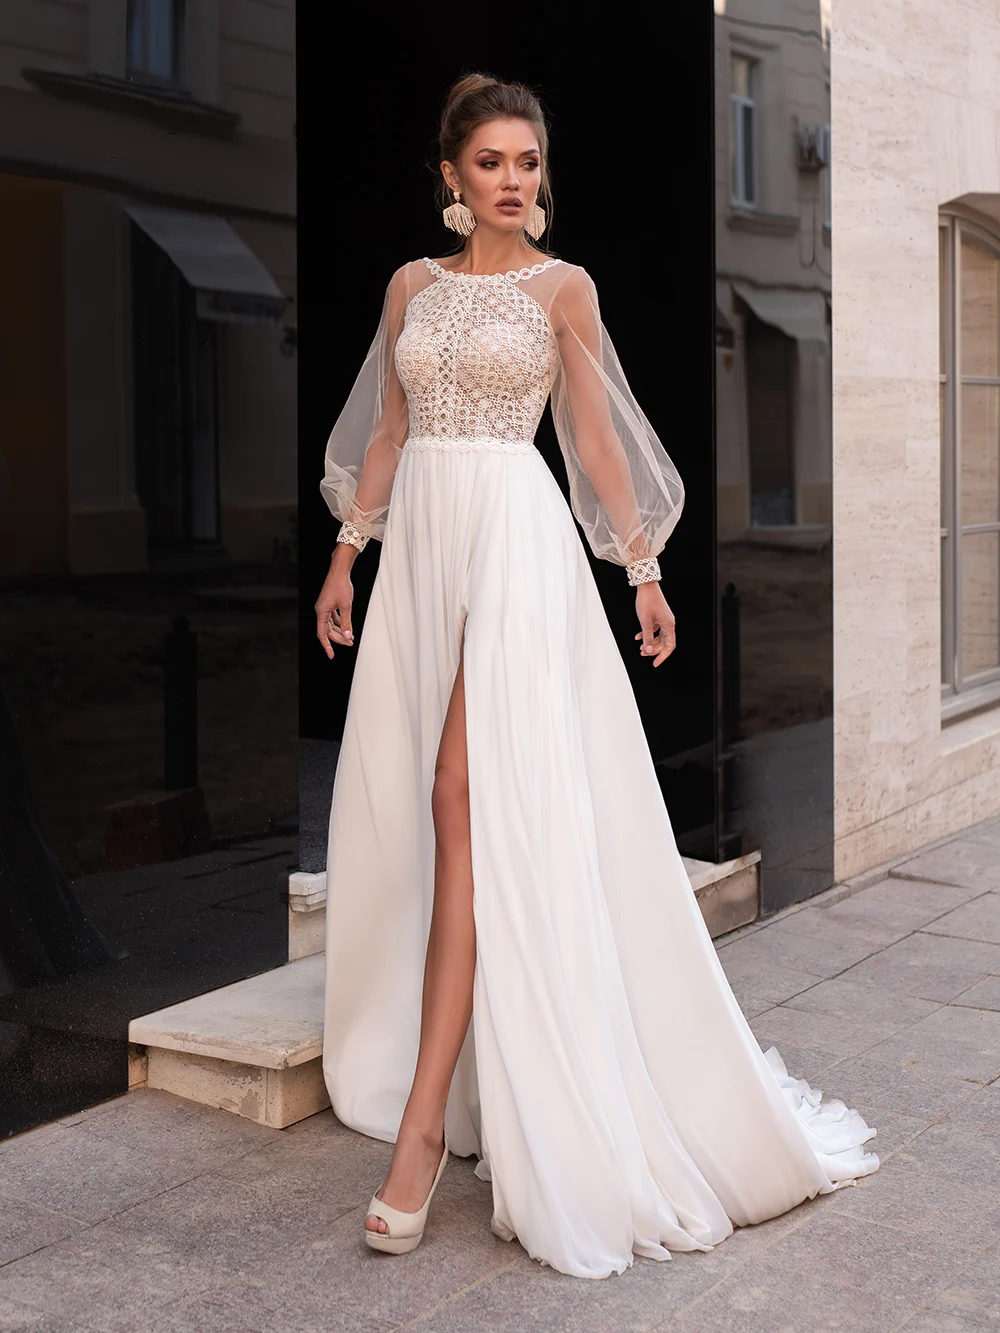 

Boat Collar Wedding Dress A-Line Long Sleeves Country Chiffon Backless Bride Gown Robe De Mariée Sexy Slit Ruched Wedding Gown